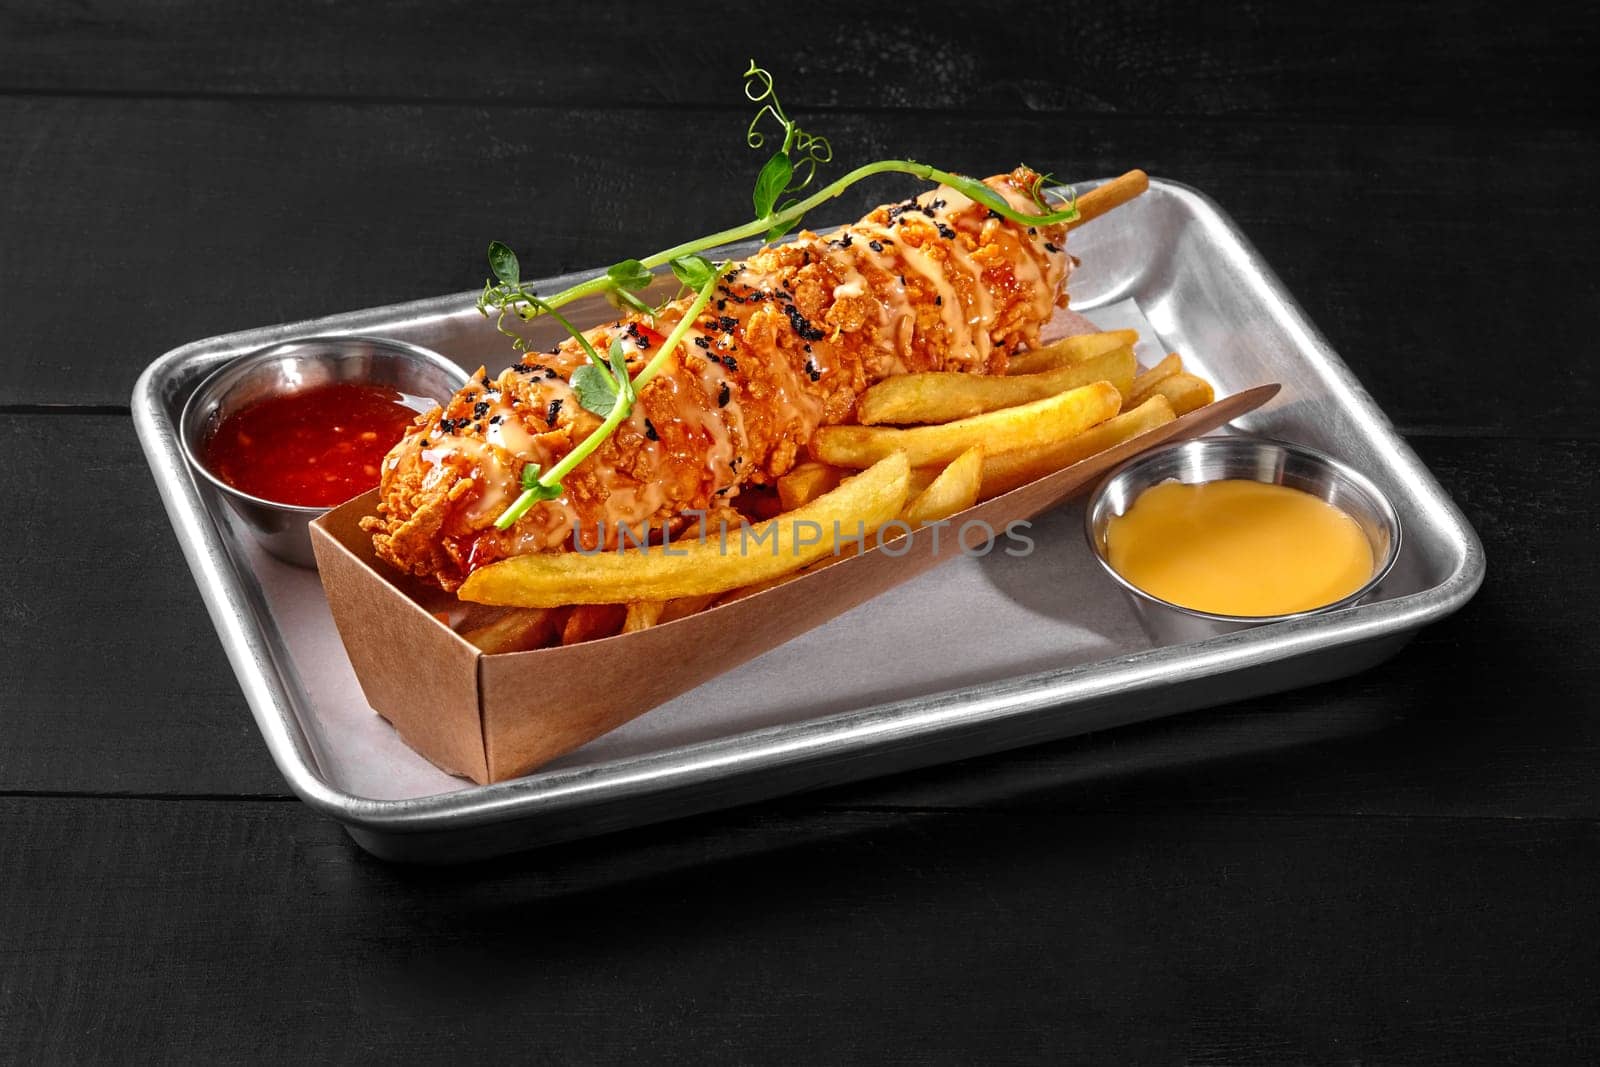 Delicious corndog with smoked sausage and crispy thick cornmeal batter on wooden skewer garnished with soil of grounded olives and microgreens served with potato fries and two sauces on metal tray